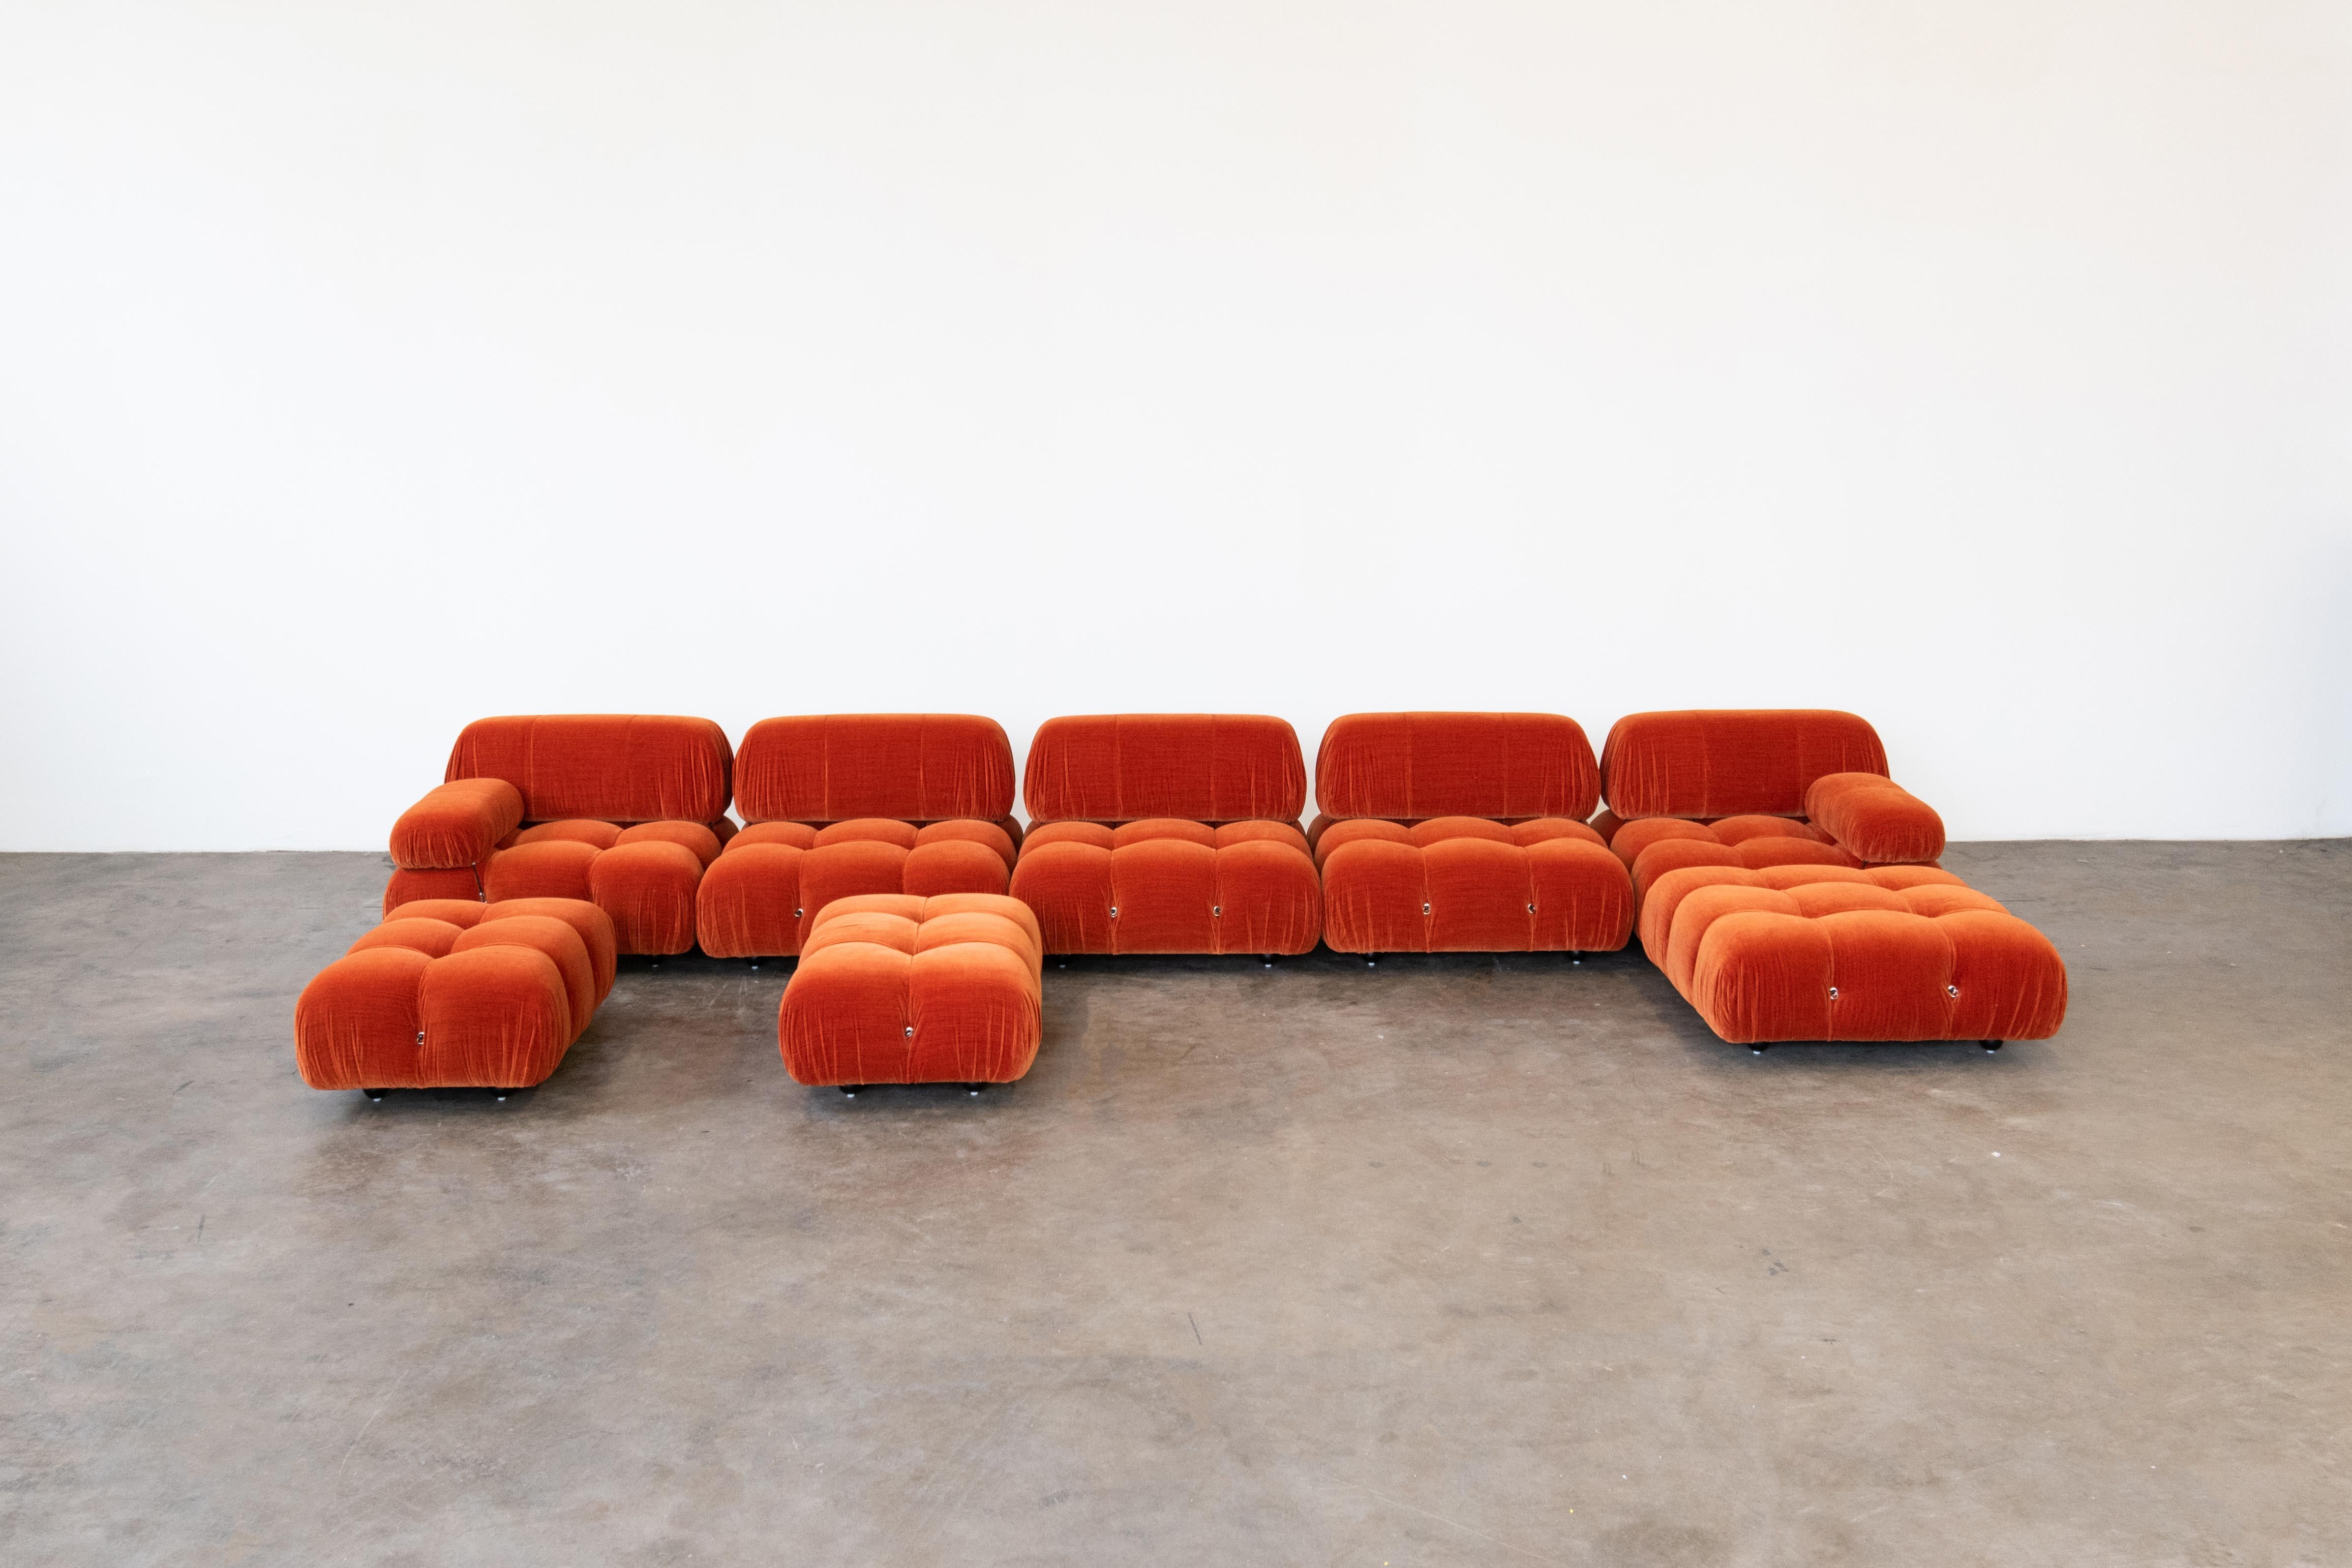 Mario Bellini
8 units ‘Camaleonda’ Sofa, first edition stamped on the back
Fabric
Manufactured by C&B, Italy, 1970s
Width 96 x Depth 96 x Height 70 cm.